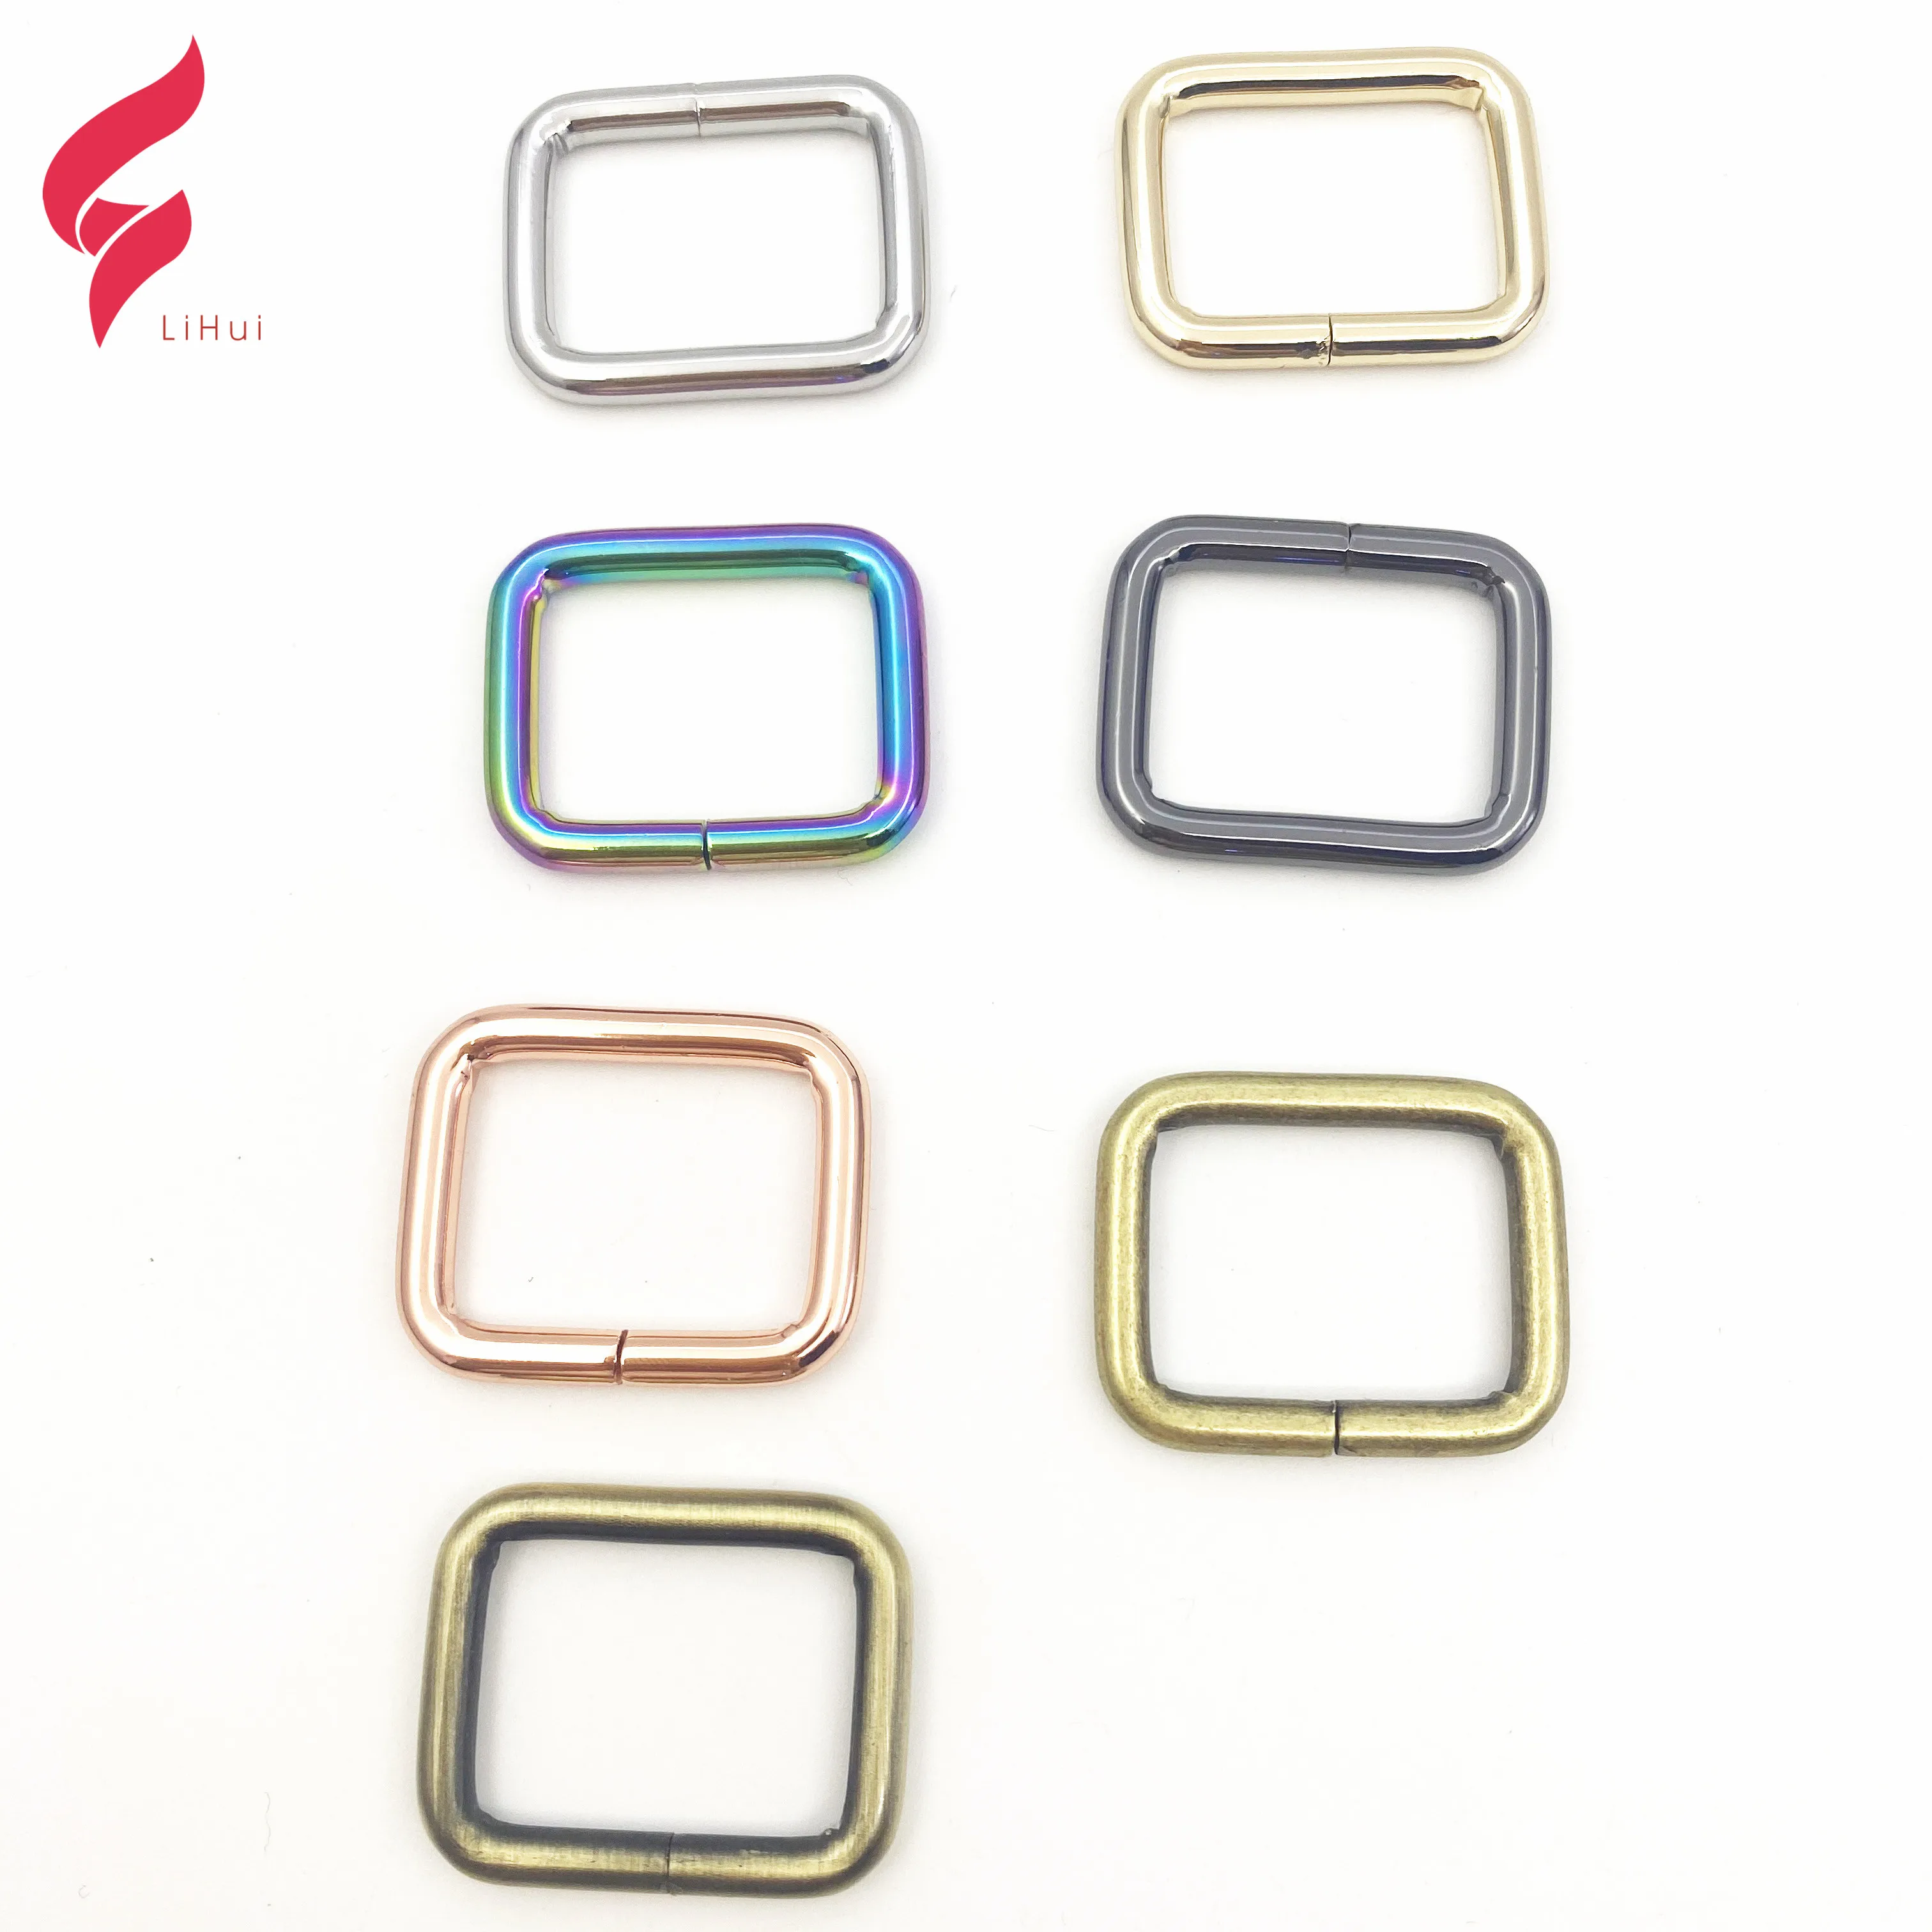 

High quality 1 inch rectangle handbag ring handbag accessories hardware square rings for bag decorative buckle, Nickle ,gold ,gunmetal or as your request